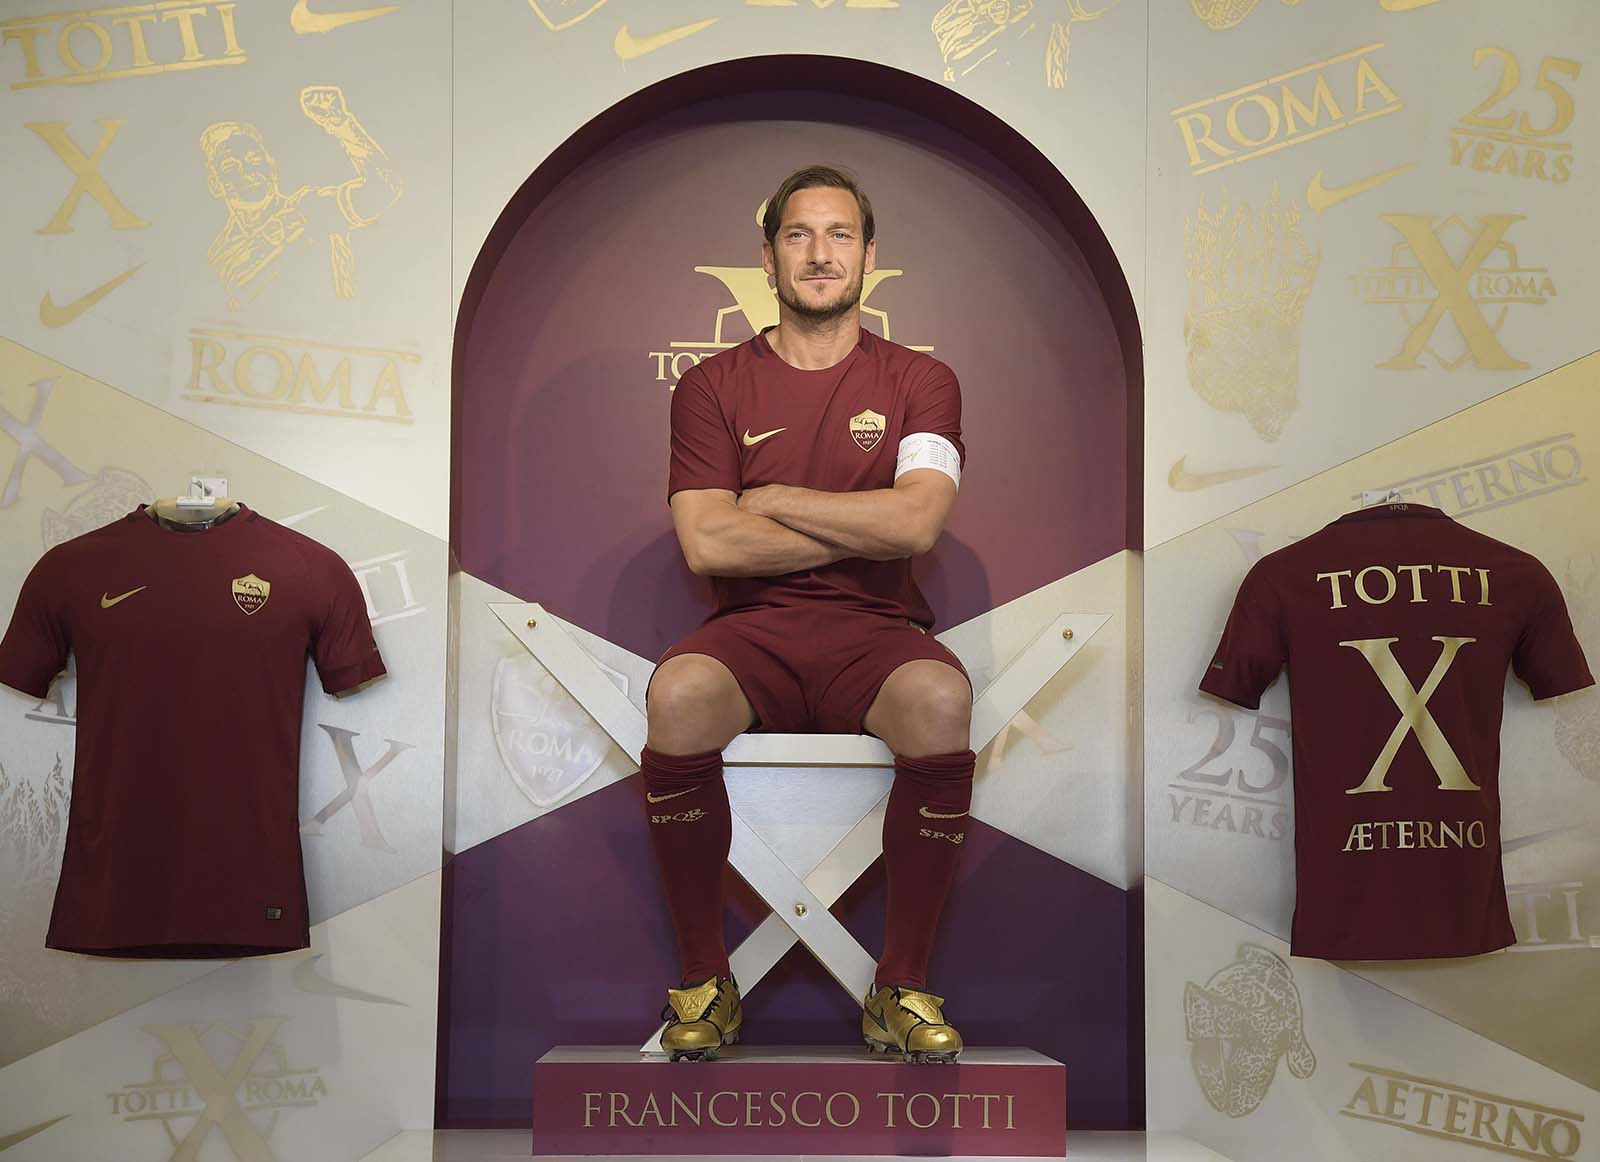 totti-trains-in-nike-tiempo-x-totti-boots-with-exclusive-detail%2B%25282%2529.jpg